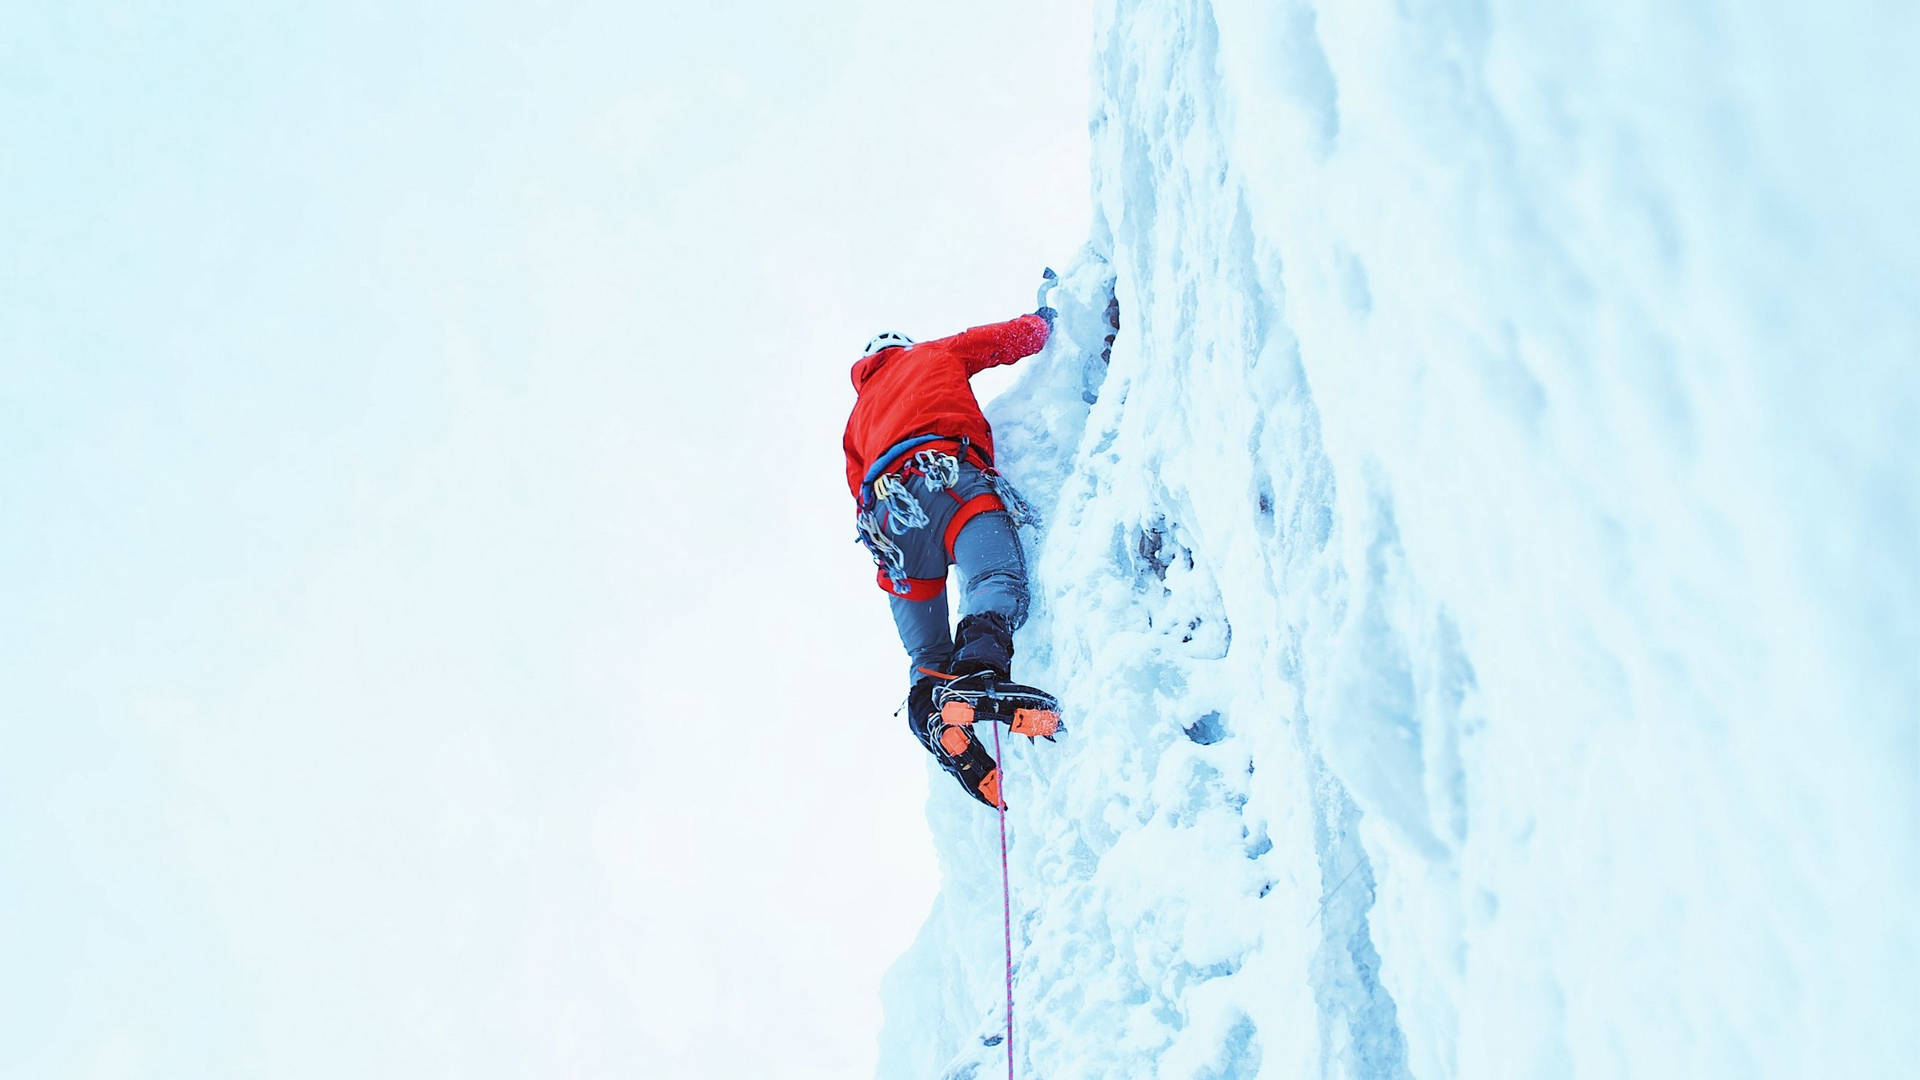 Climbing In Bright Red Jacket Background